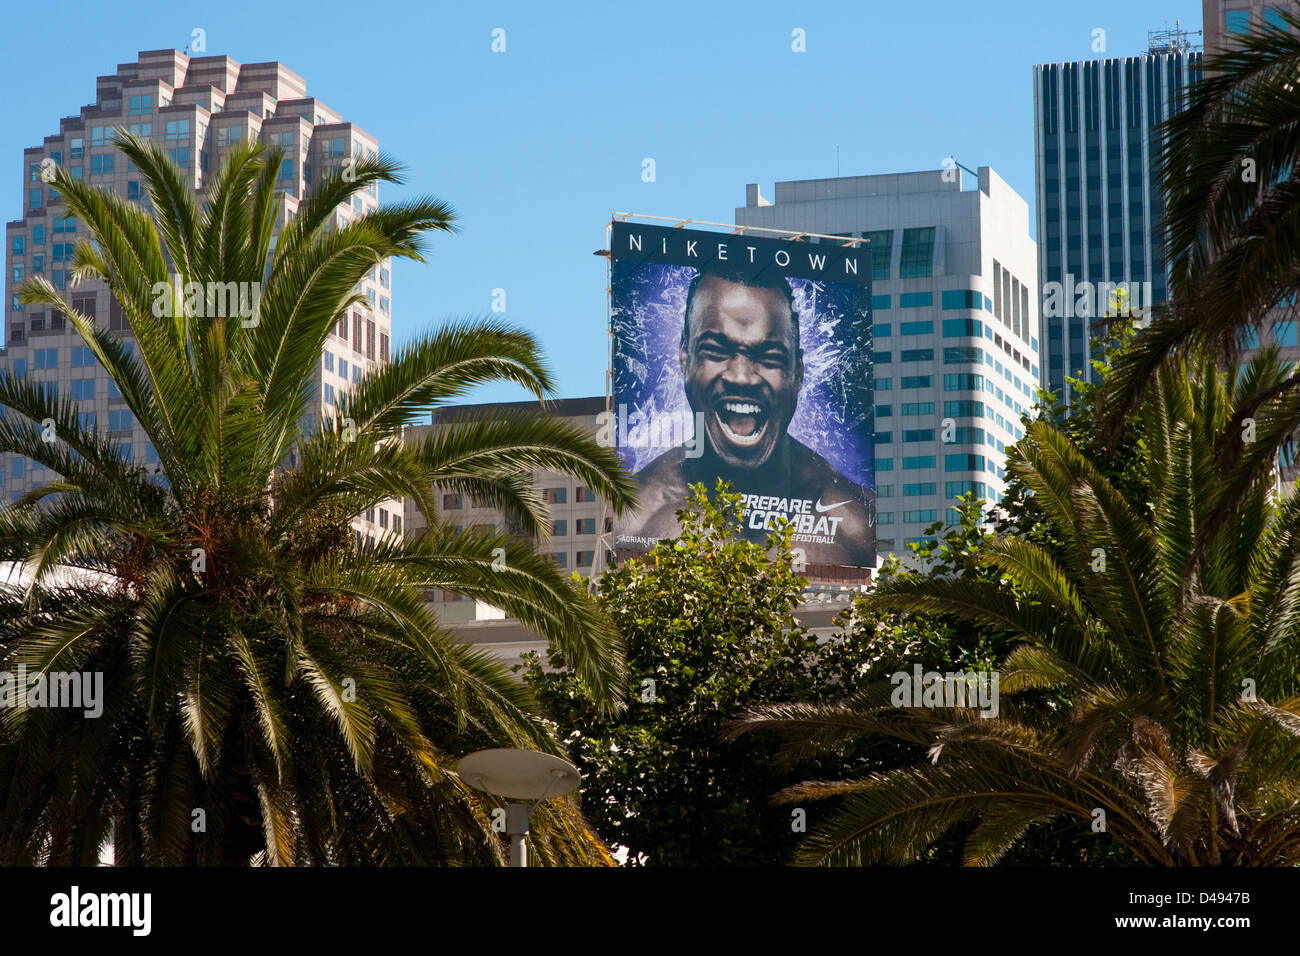 San Francisco, USA, advertising poster from Nike Town Stock Photo - Alamy